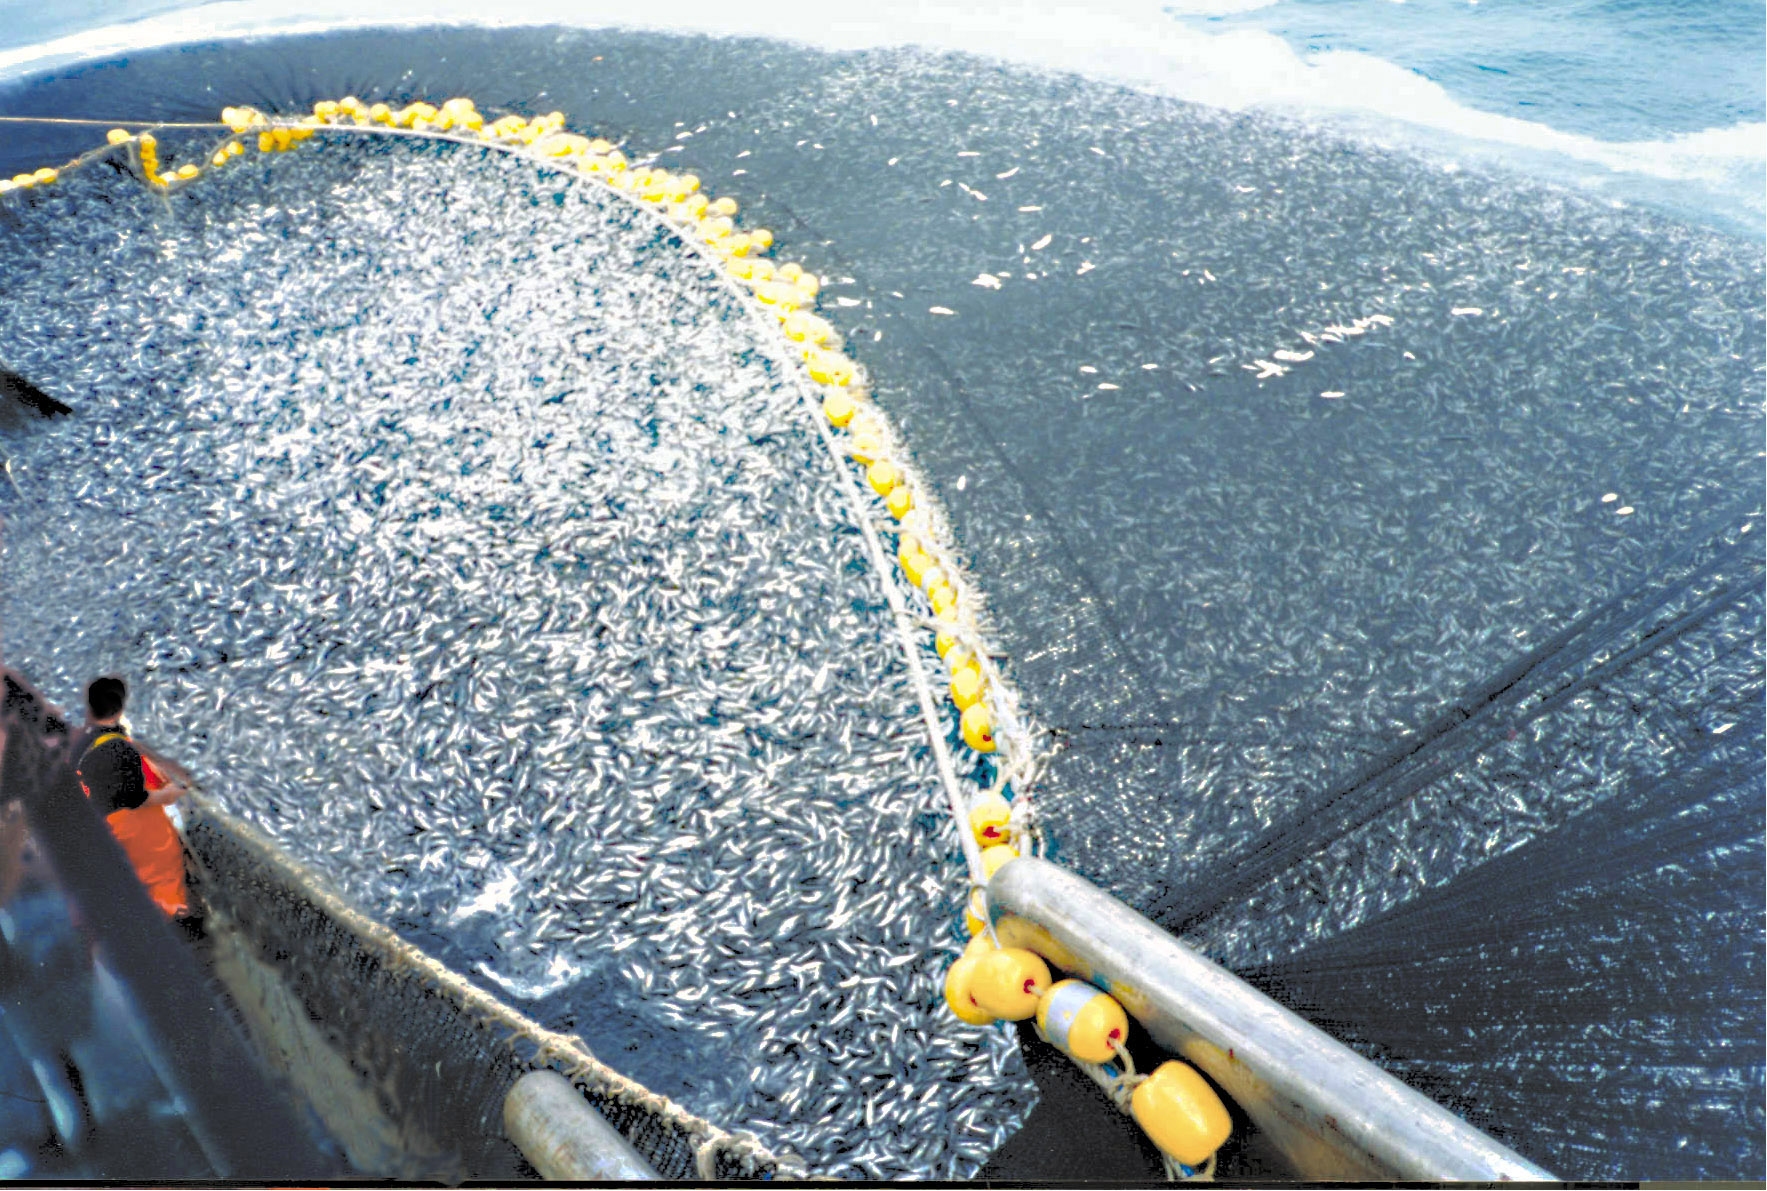 About 400 tons of Chilean jack mackerel (Trachurus murphyi) are caught by a Chilean purse seiner off of Peru. Important decisions regarding fishing, mining, pipeline construction, oil and gas extraction and many other international business investments — all of which can seriously impact the environment — are today being decided secretly via complex trade treaty dispute settlement provisions. Photo by C. Ortiz Rojas courtesy of NOAA